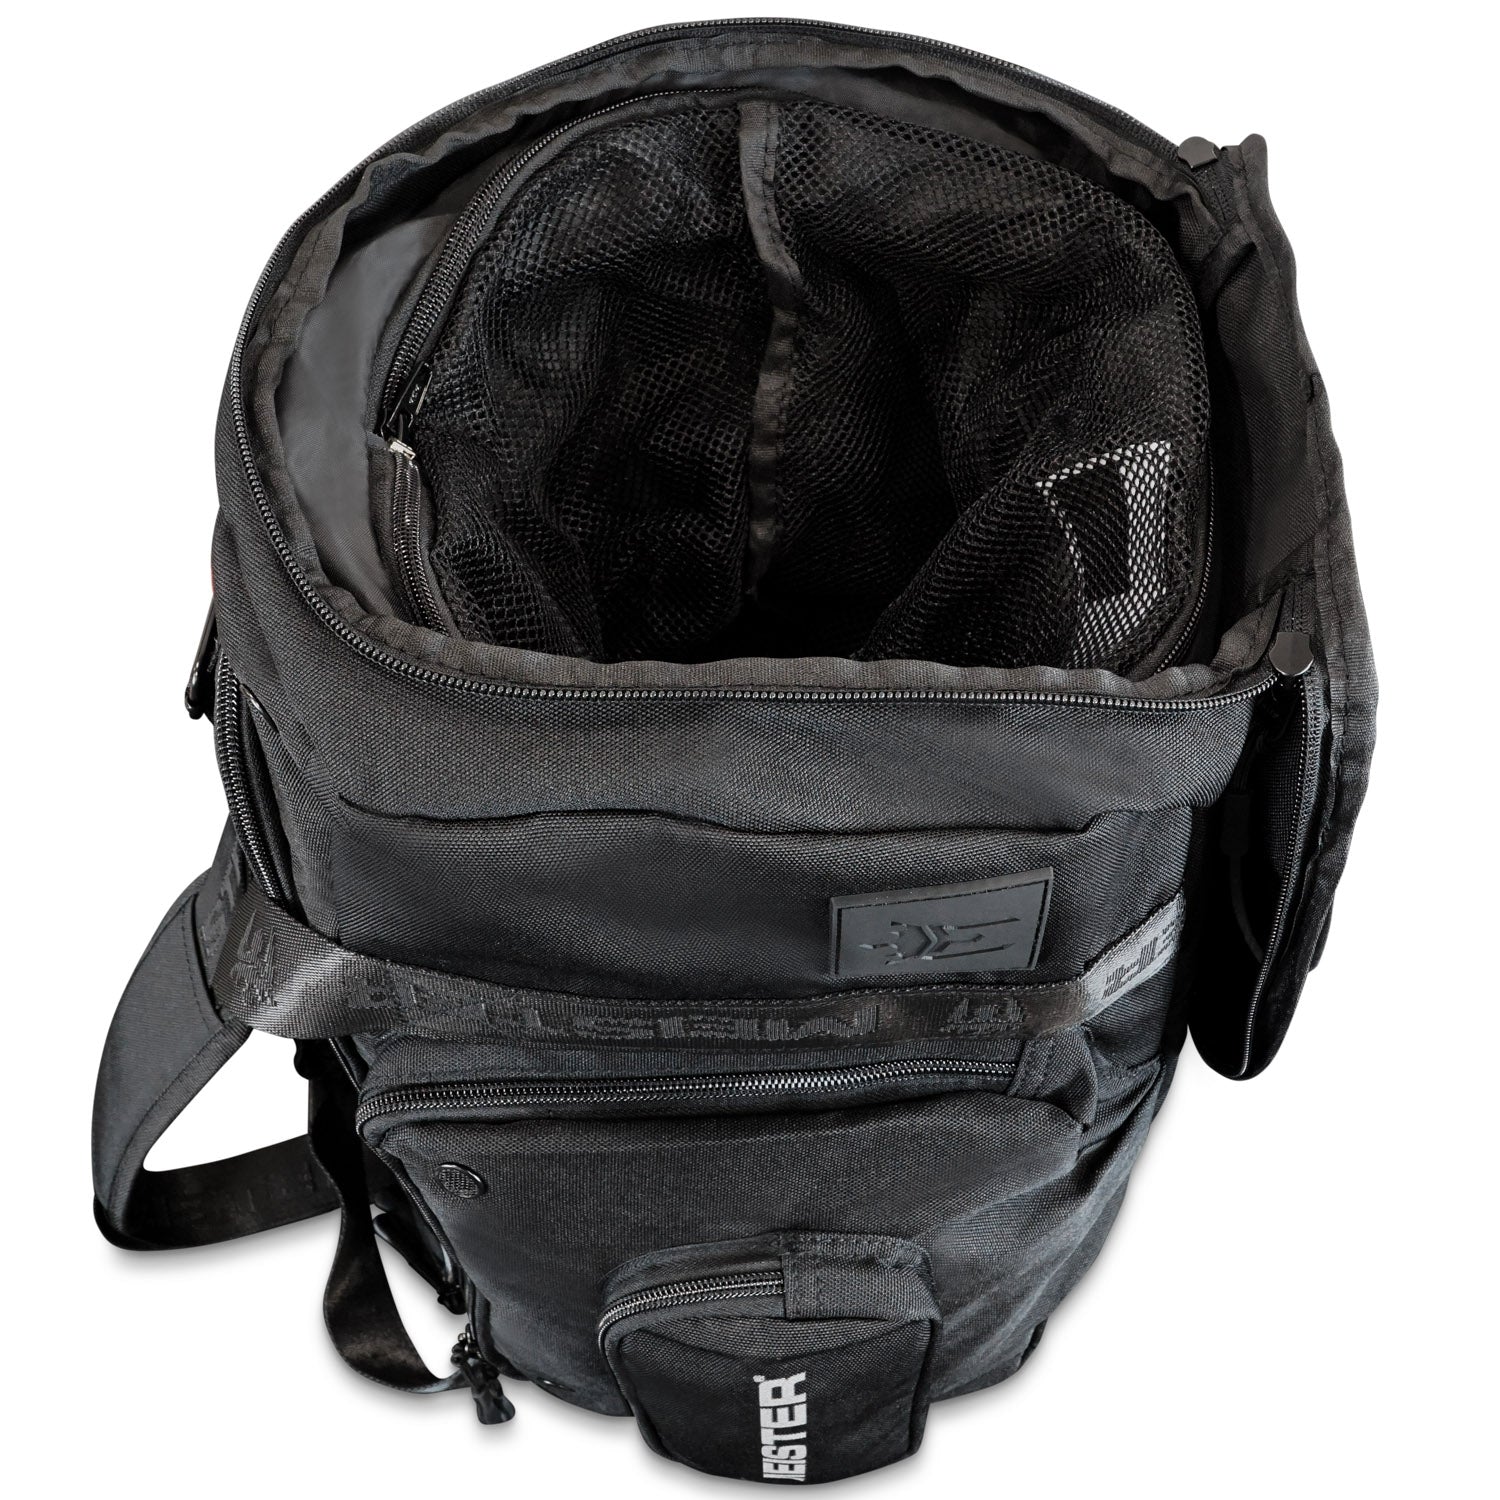 Meister Brawler Gym Bag for Fighters w/ Zip-Out Wash Bag & Shoe Locker